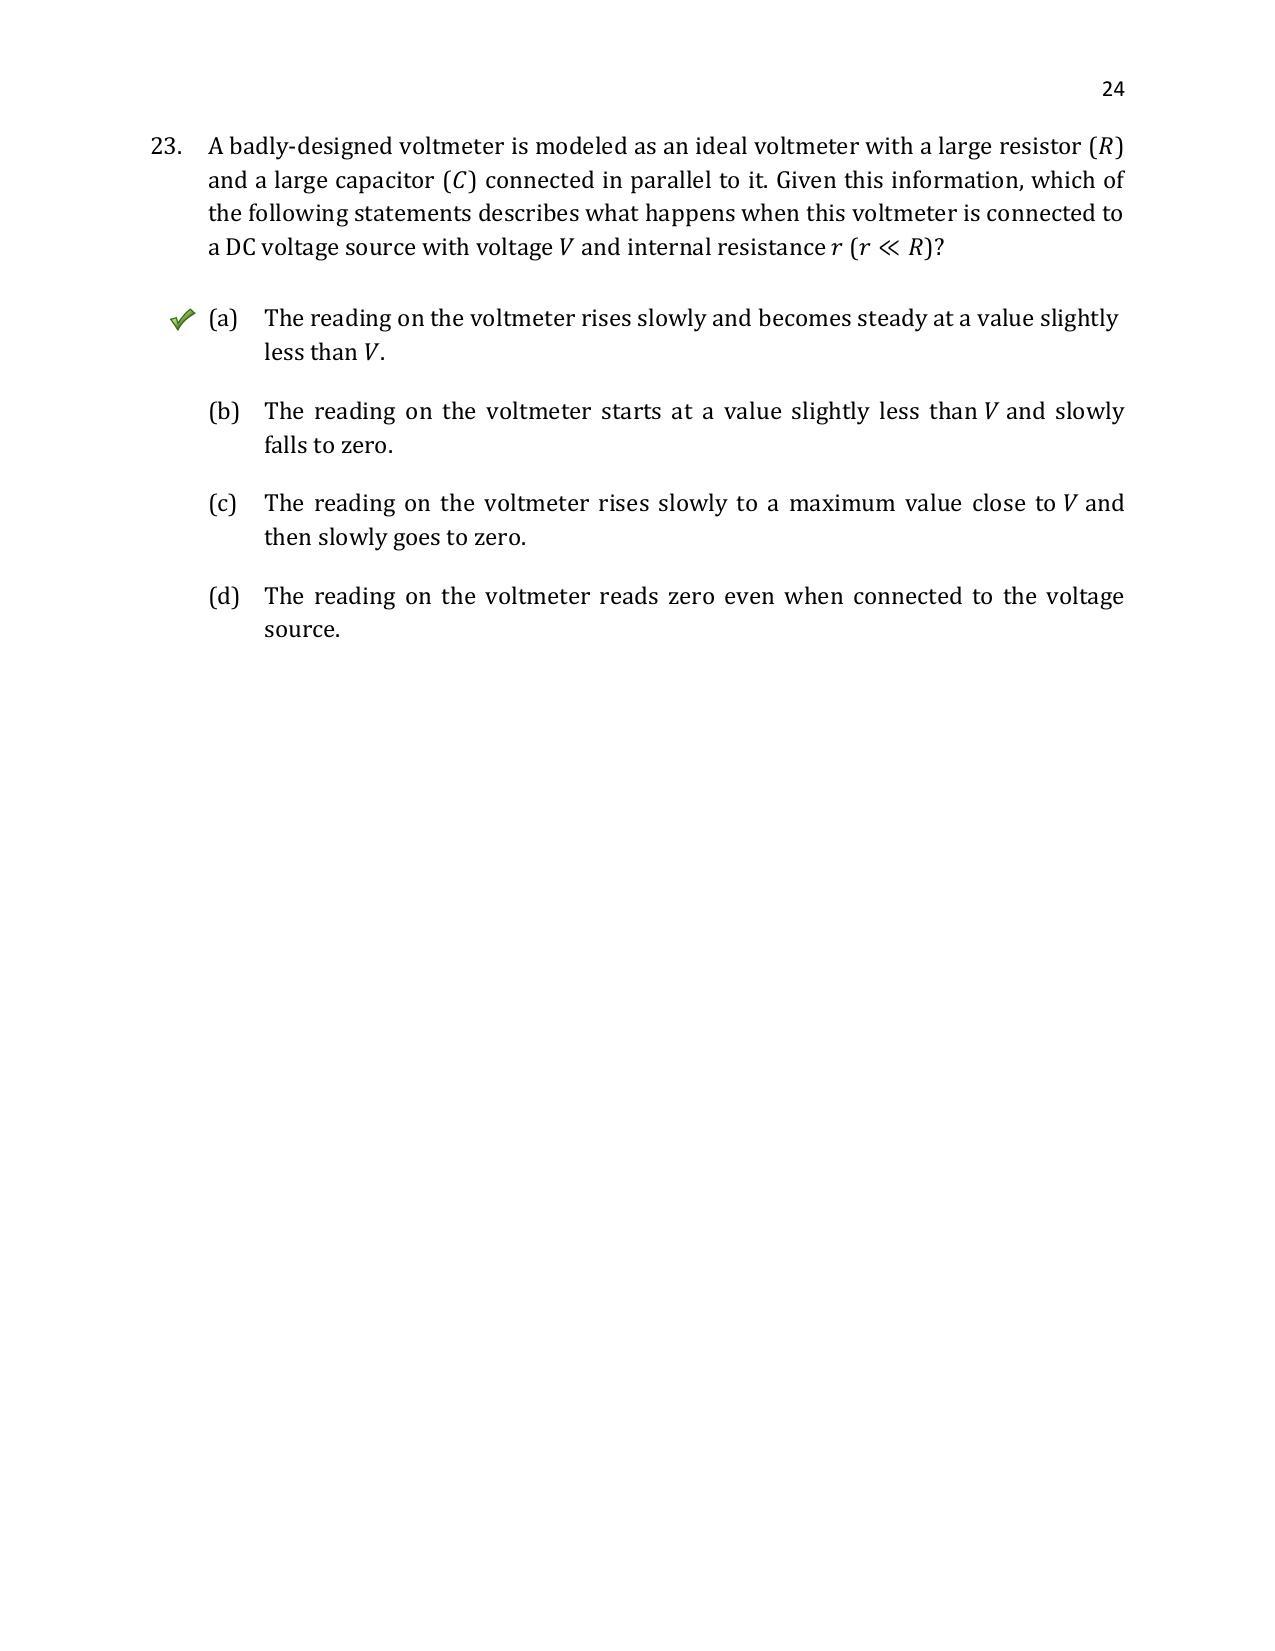 TIFR GS 2020 Physics Question Paper - Page 25